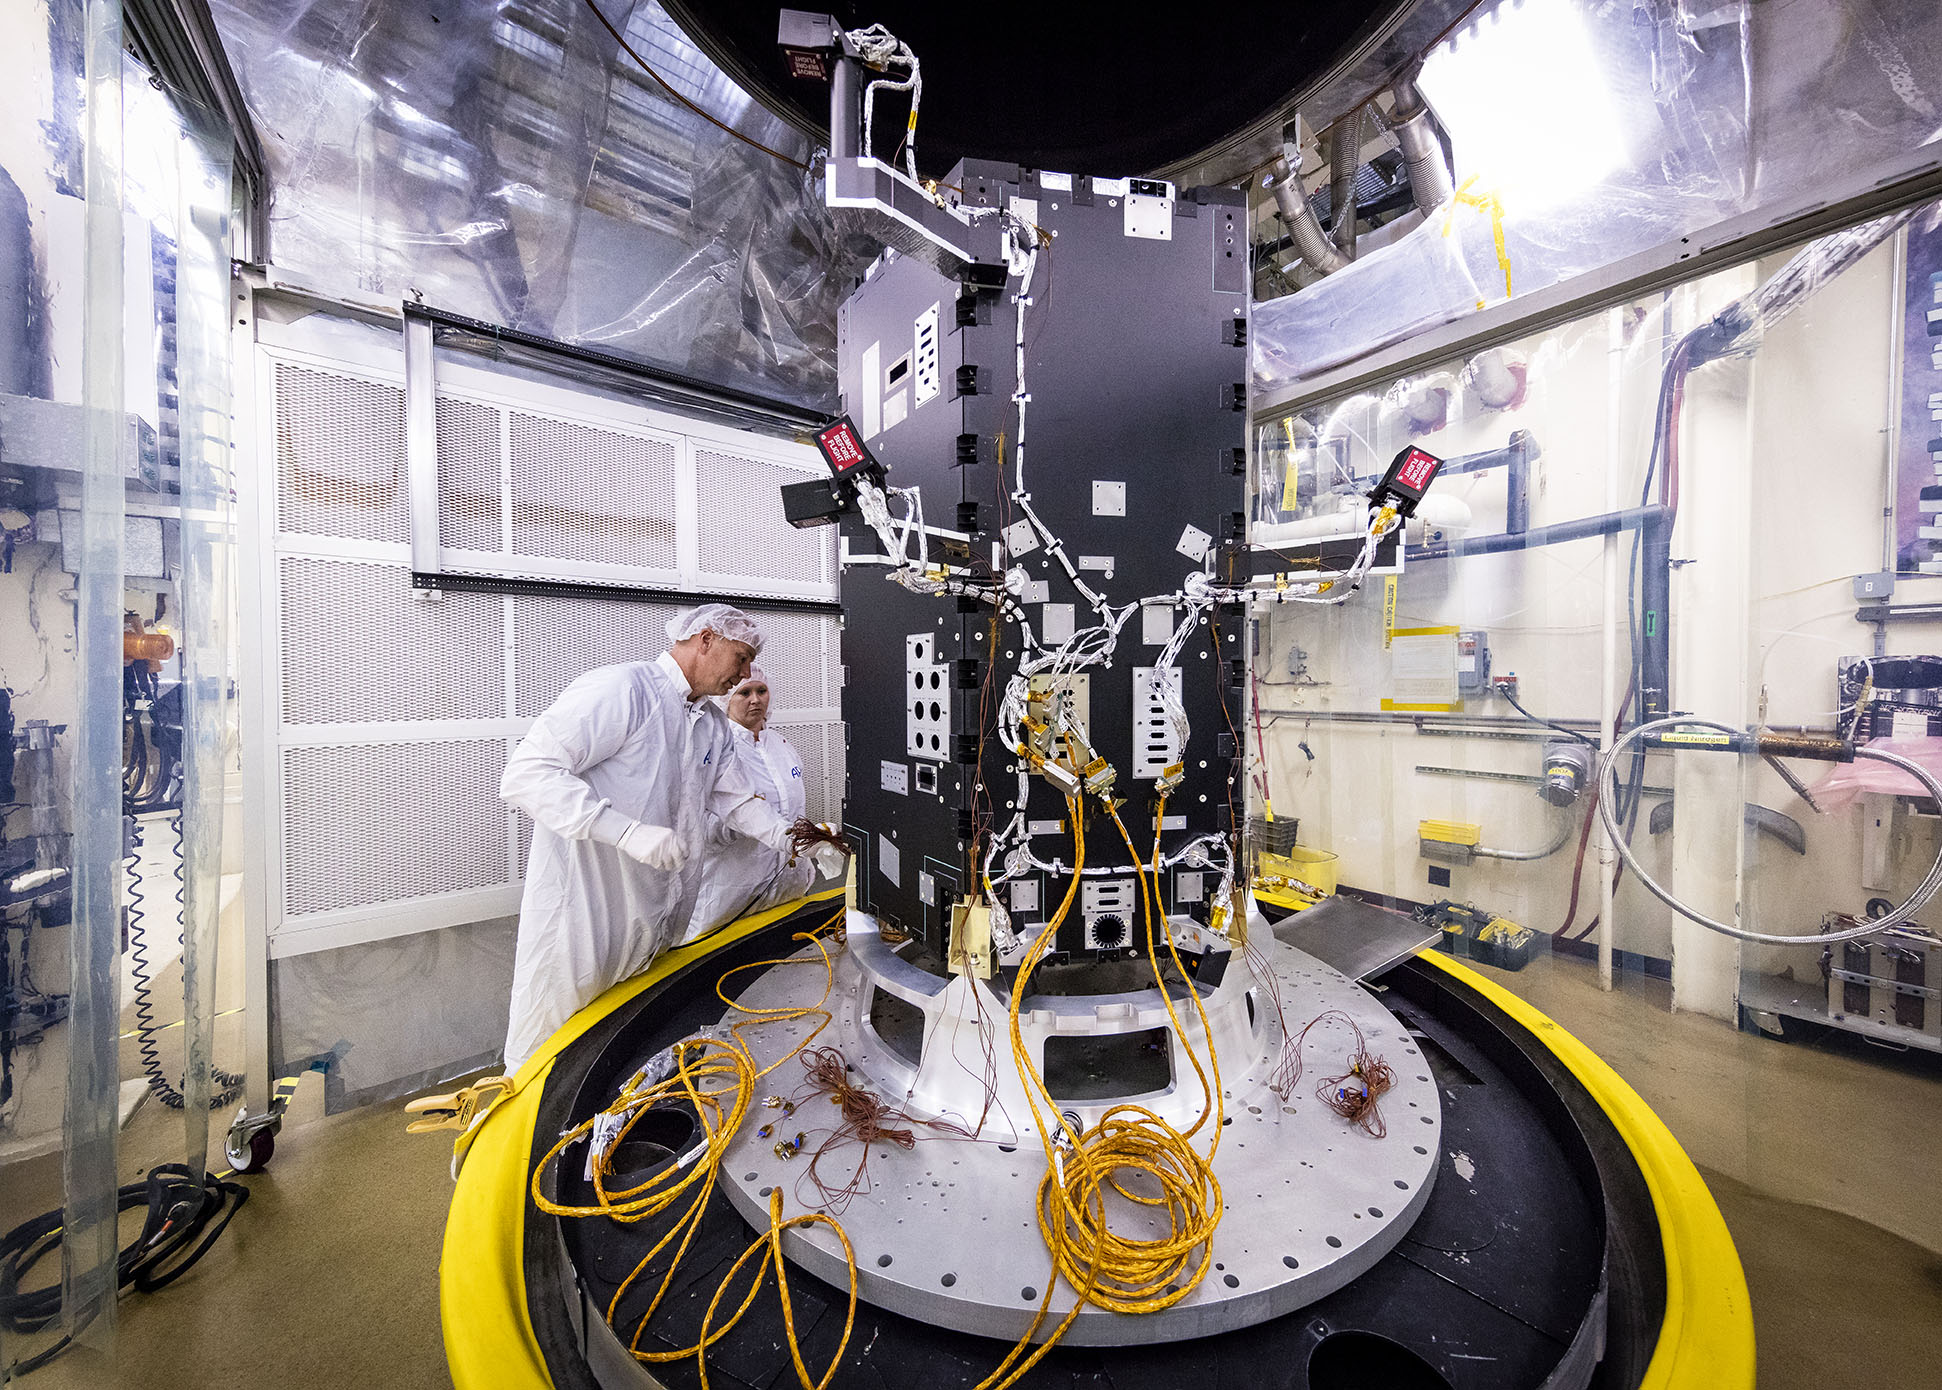 Engineers at the Johns Hopkins University Applied Physics Laboratory in Laurel, Maryland, prepare the developing Solar Probe Plus spacecraft for thermal vacuum tests that simulate conditions in space. Today the spacecraft includes the primary structure and its propulsion system; still to be installed over the next several months are critical systems such as power, communications and thermal protection, as well as science instruments.